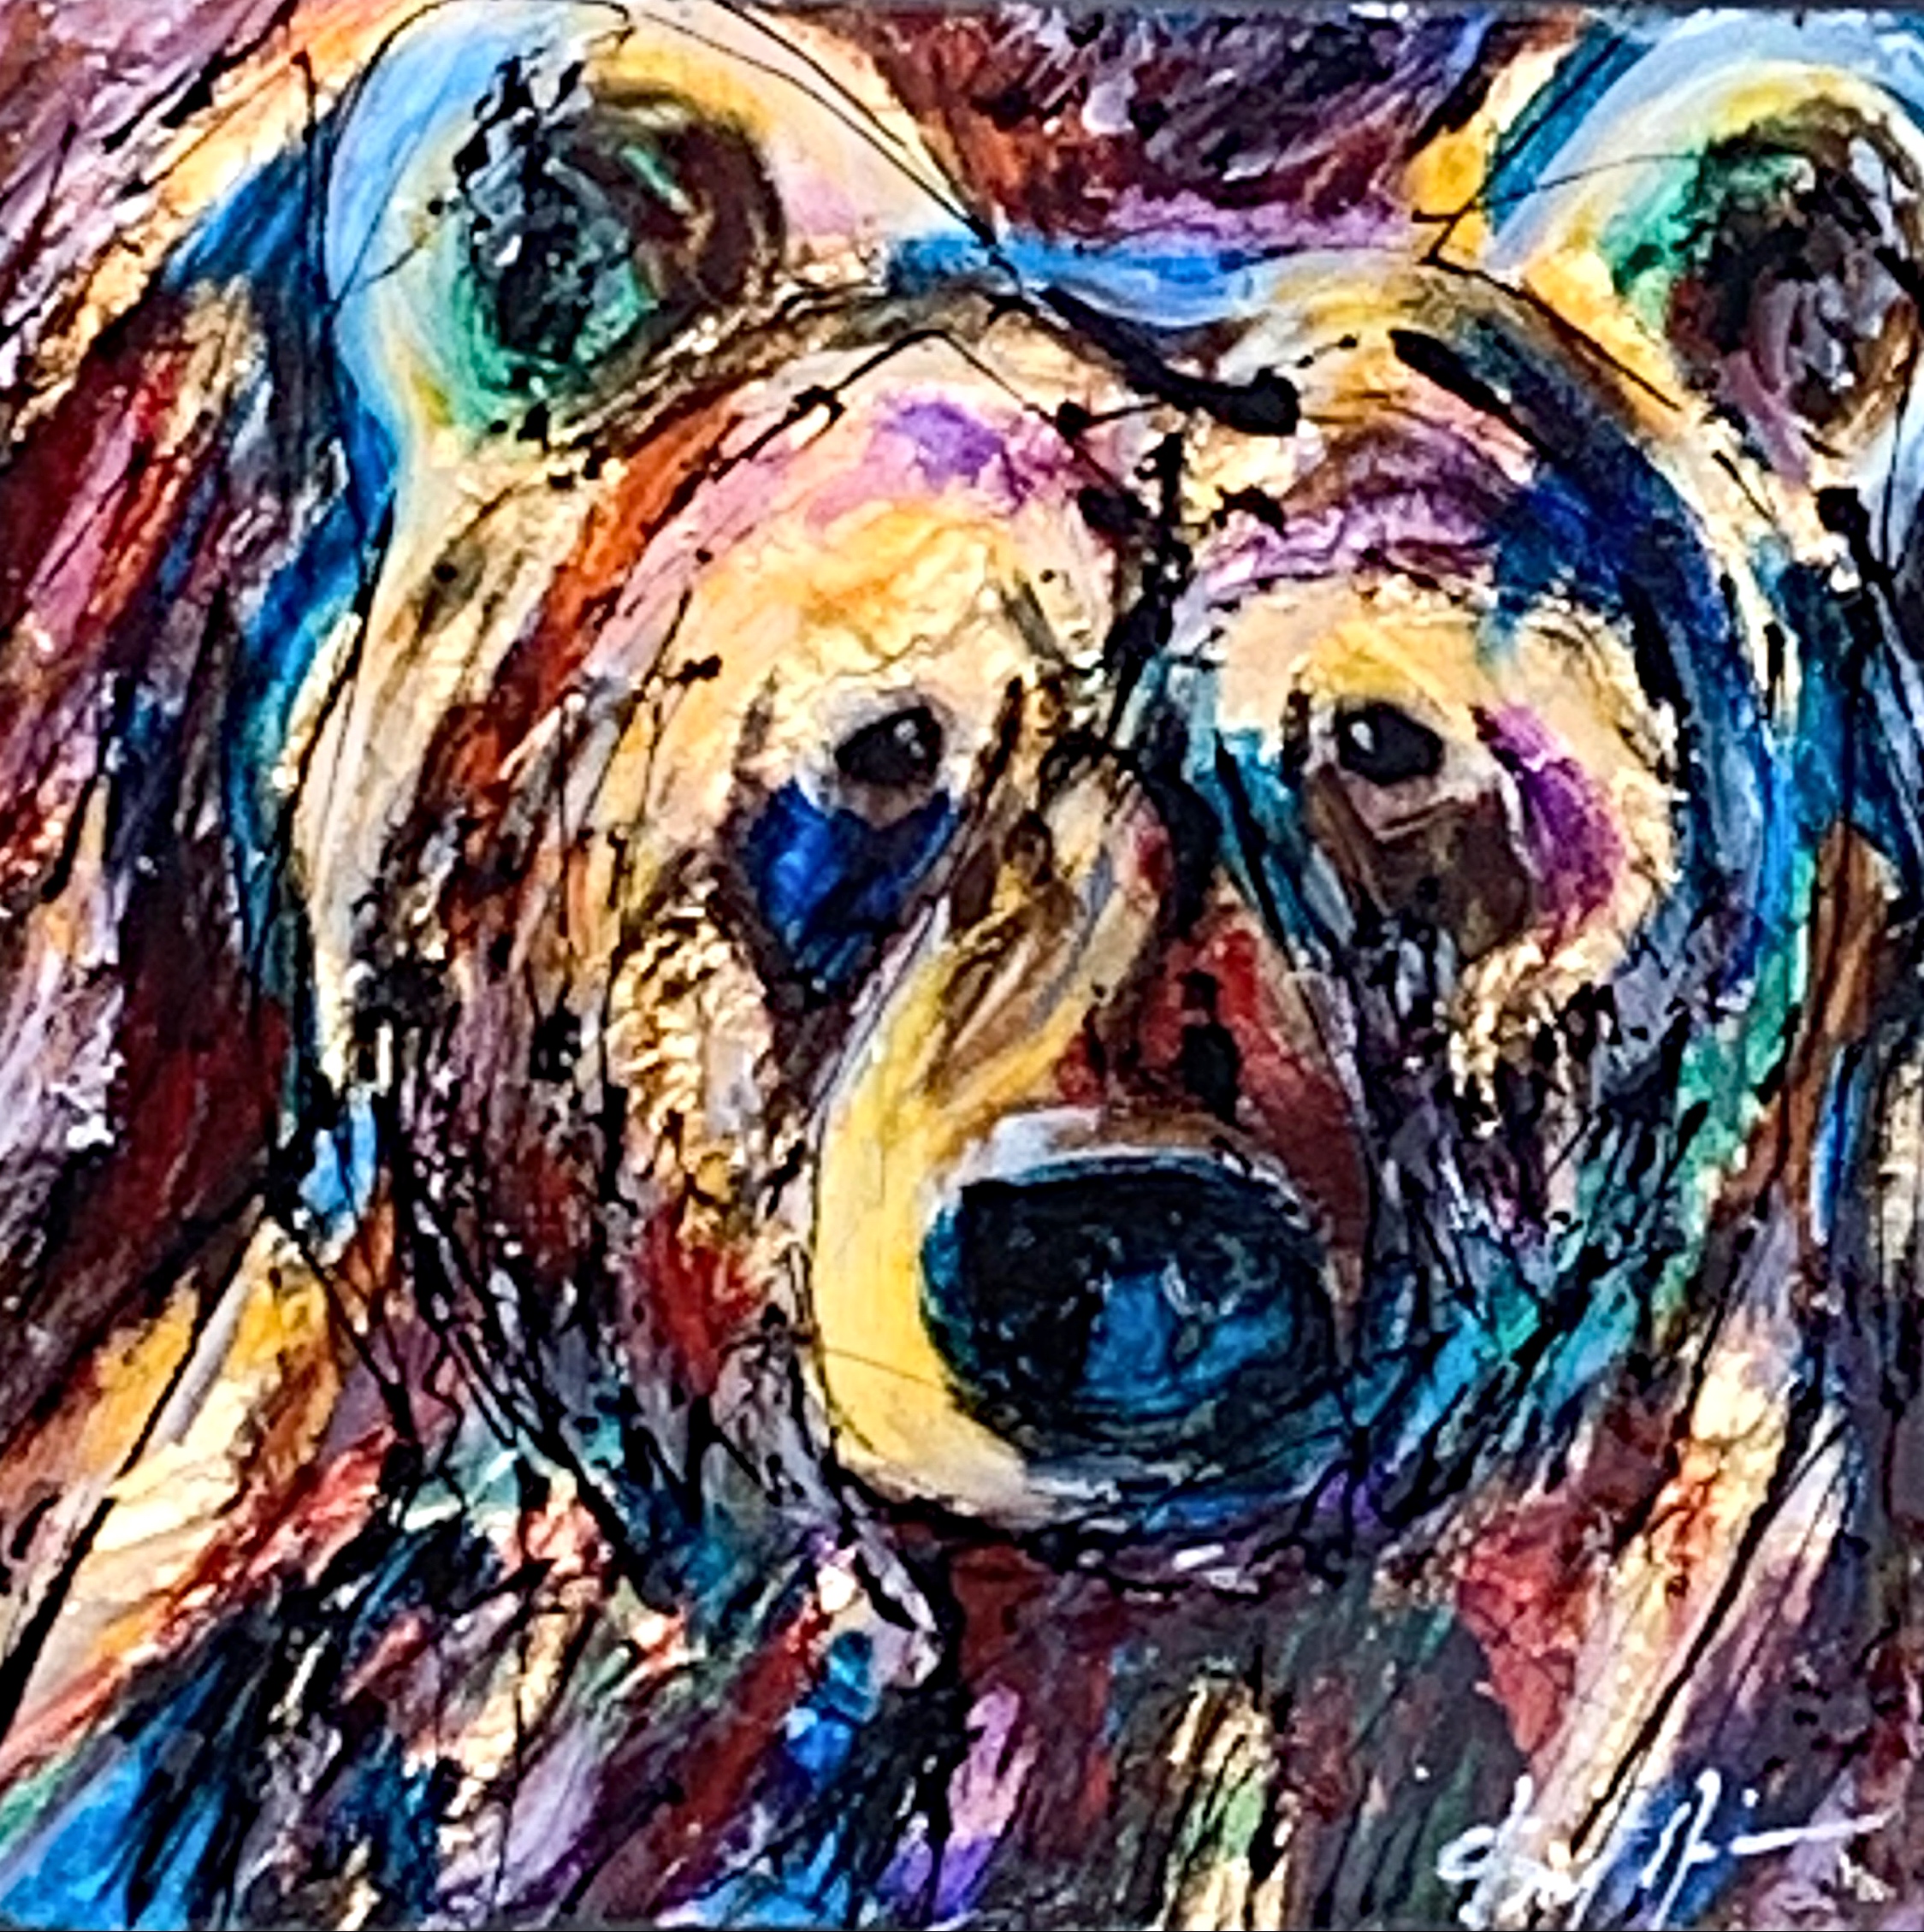 Thoughts, mixed media bear painting by David Zimmerman | Effusion Art Gallery +  Cast Glass Studio, Invermere BC